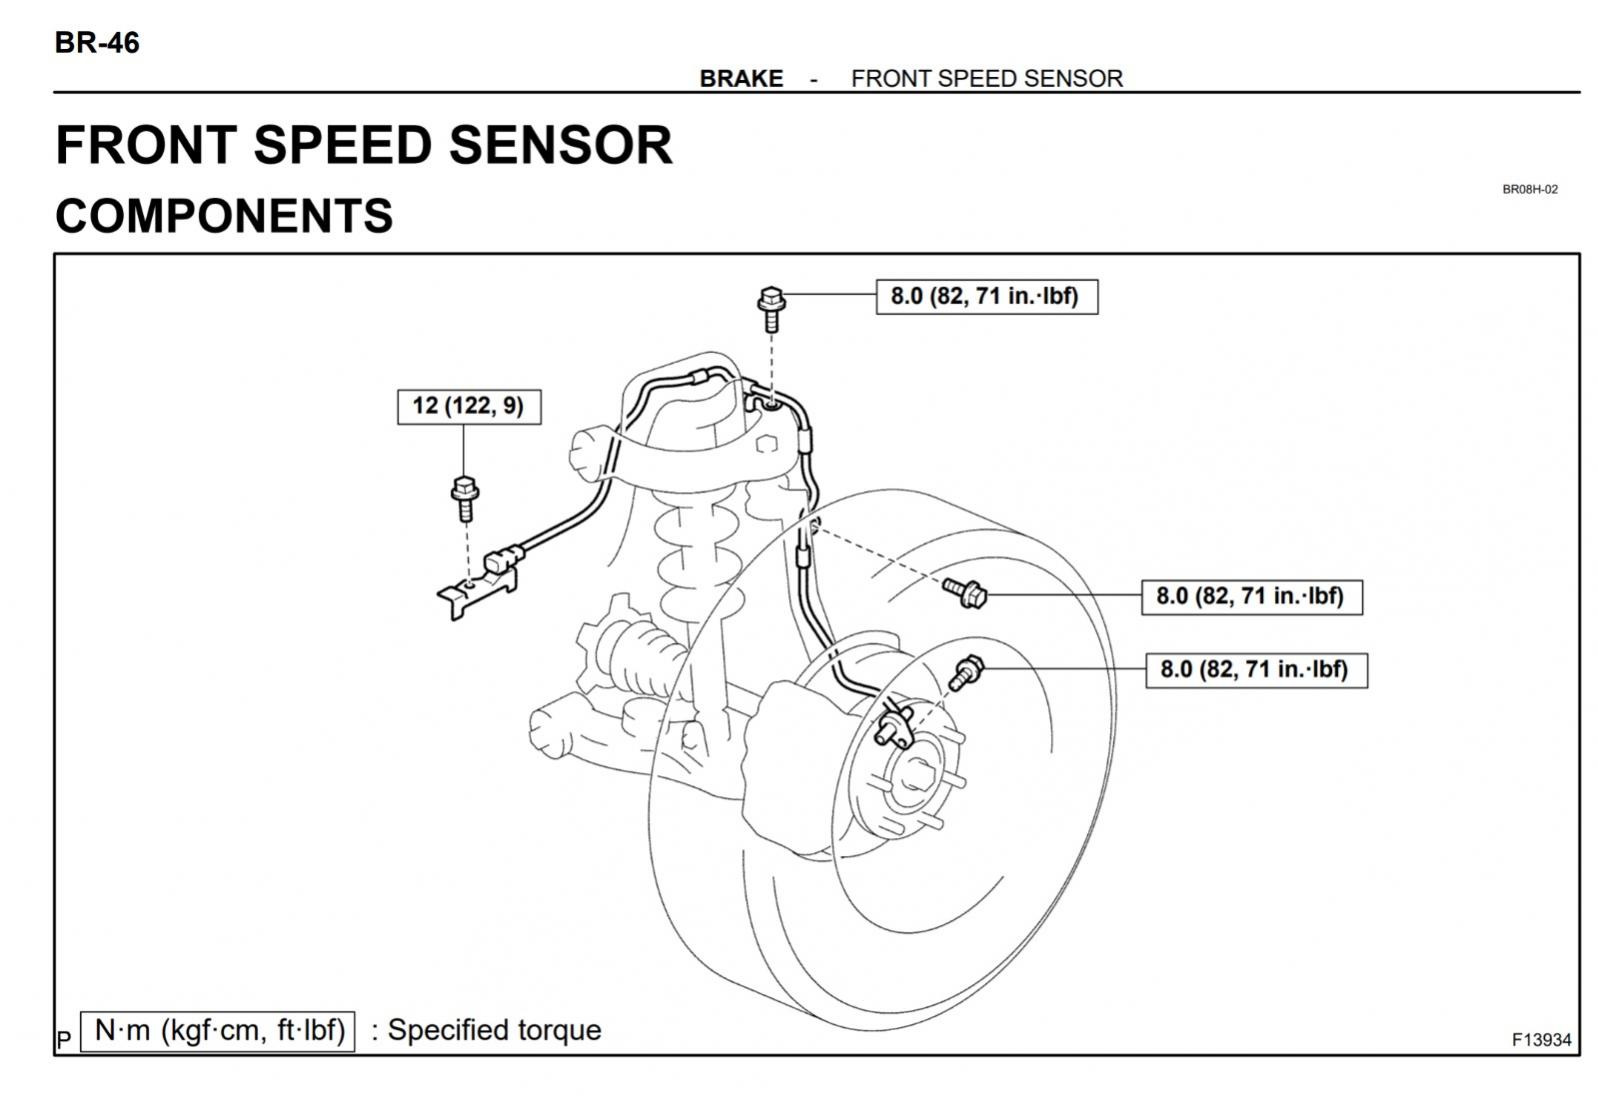 2002 ABS Wheel speed sensor location and replacement-whatsapp-image-2021-09-27-1-58-54-pm-jpg